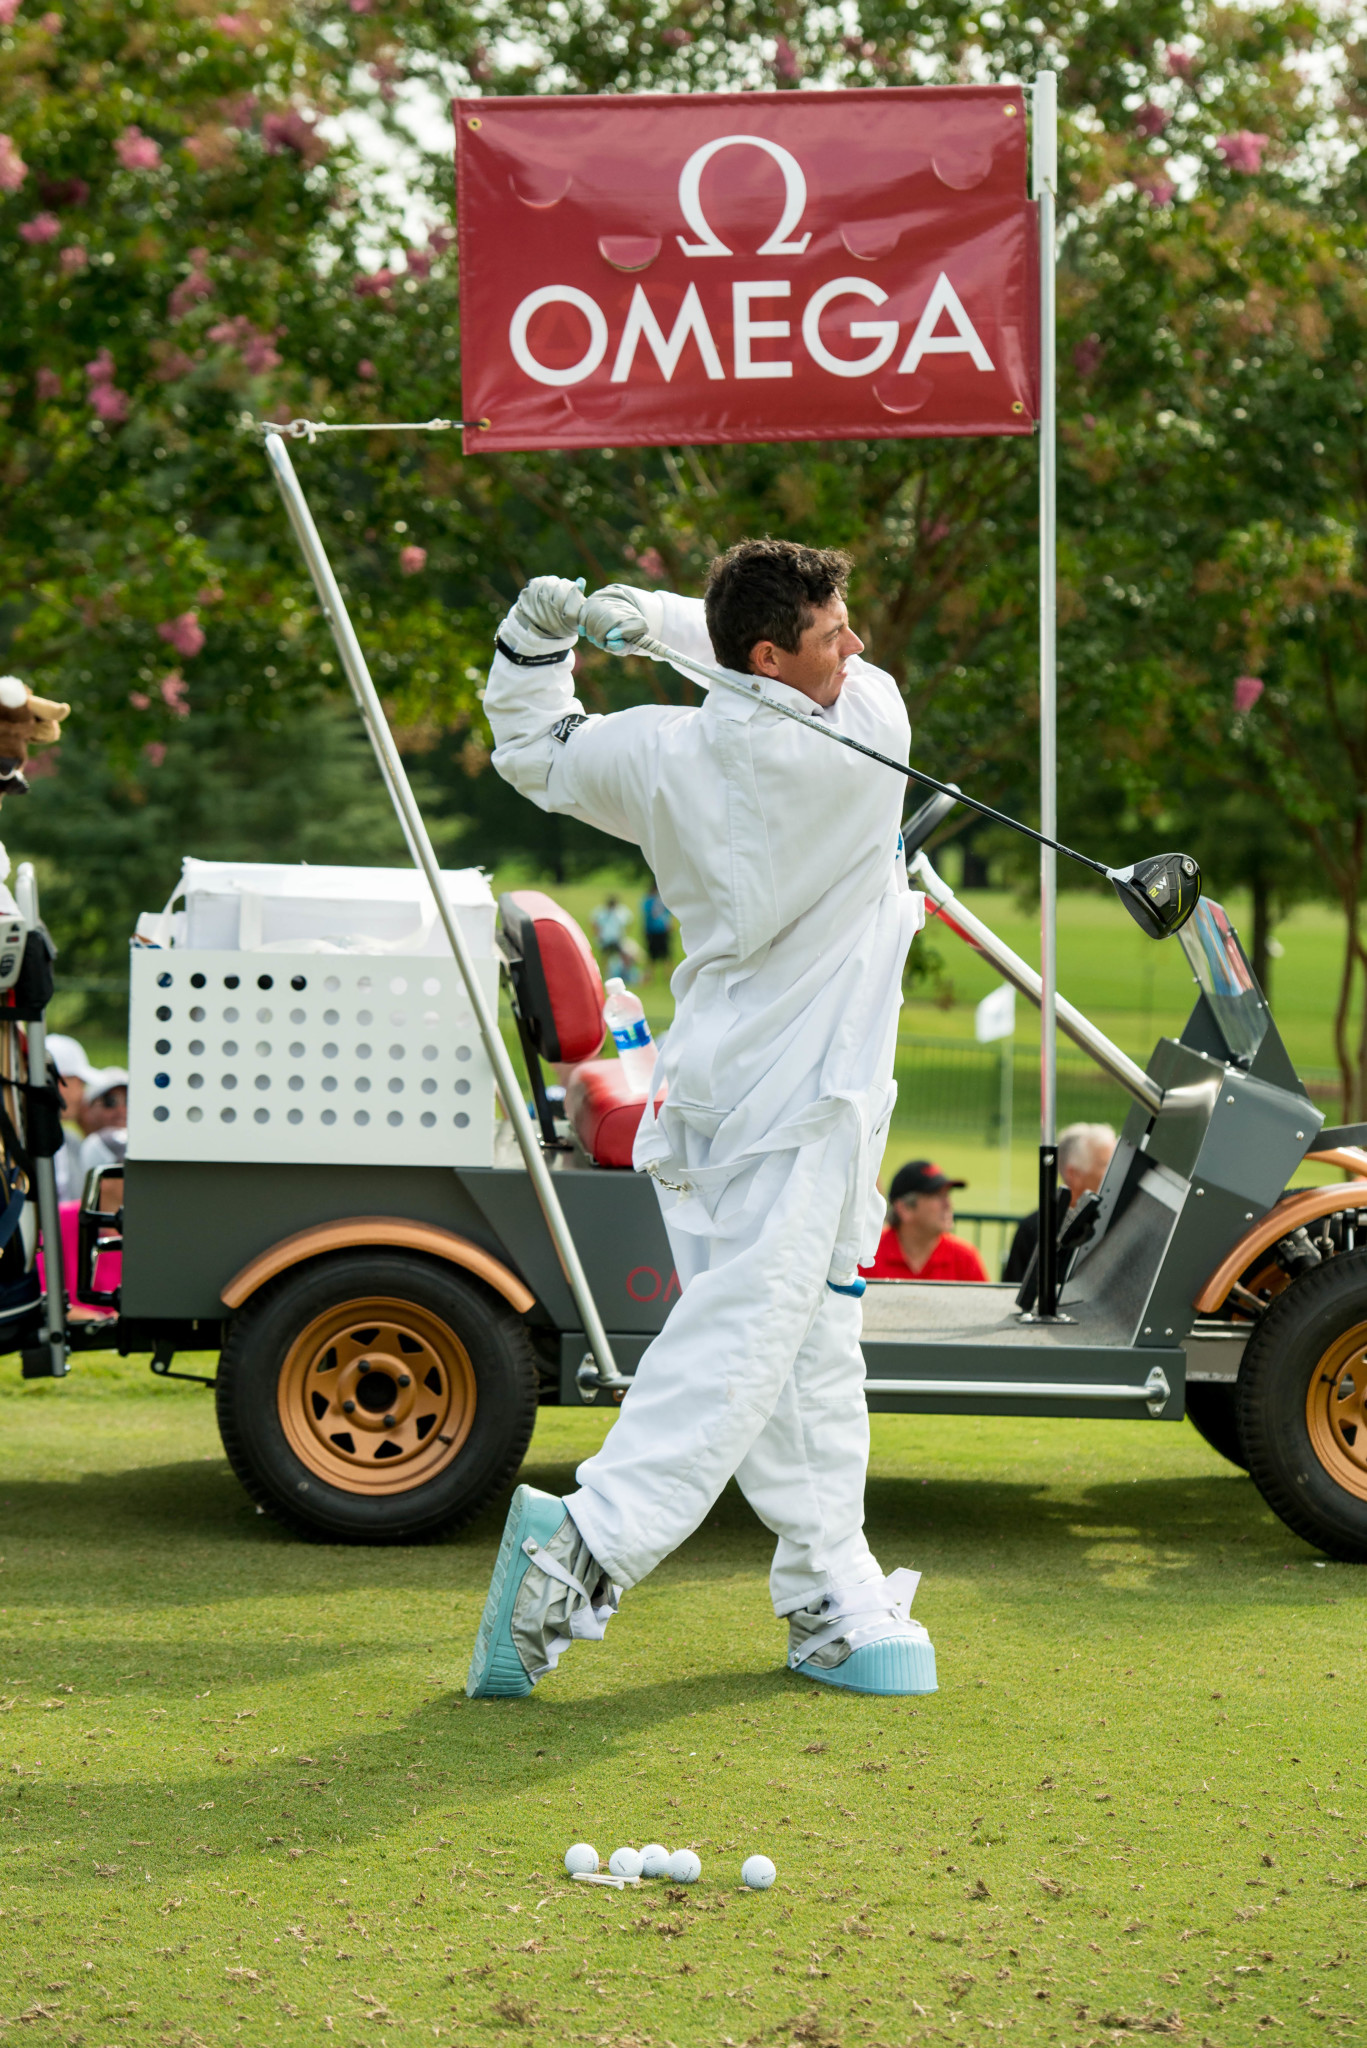 Rory mcilroy hits drive in astronaut uniform - omega